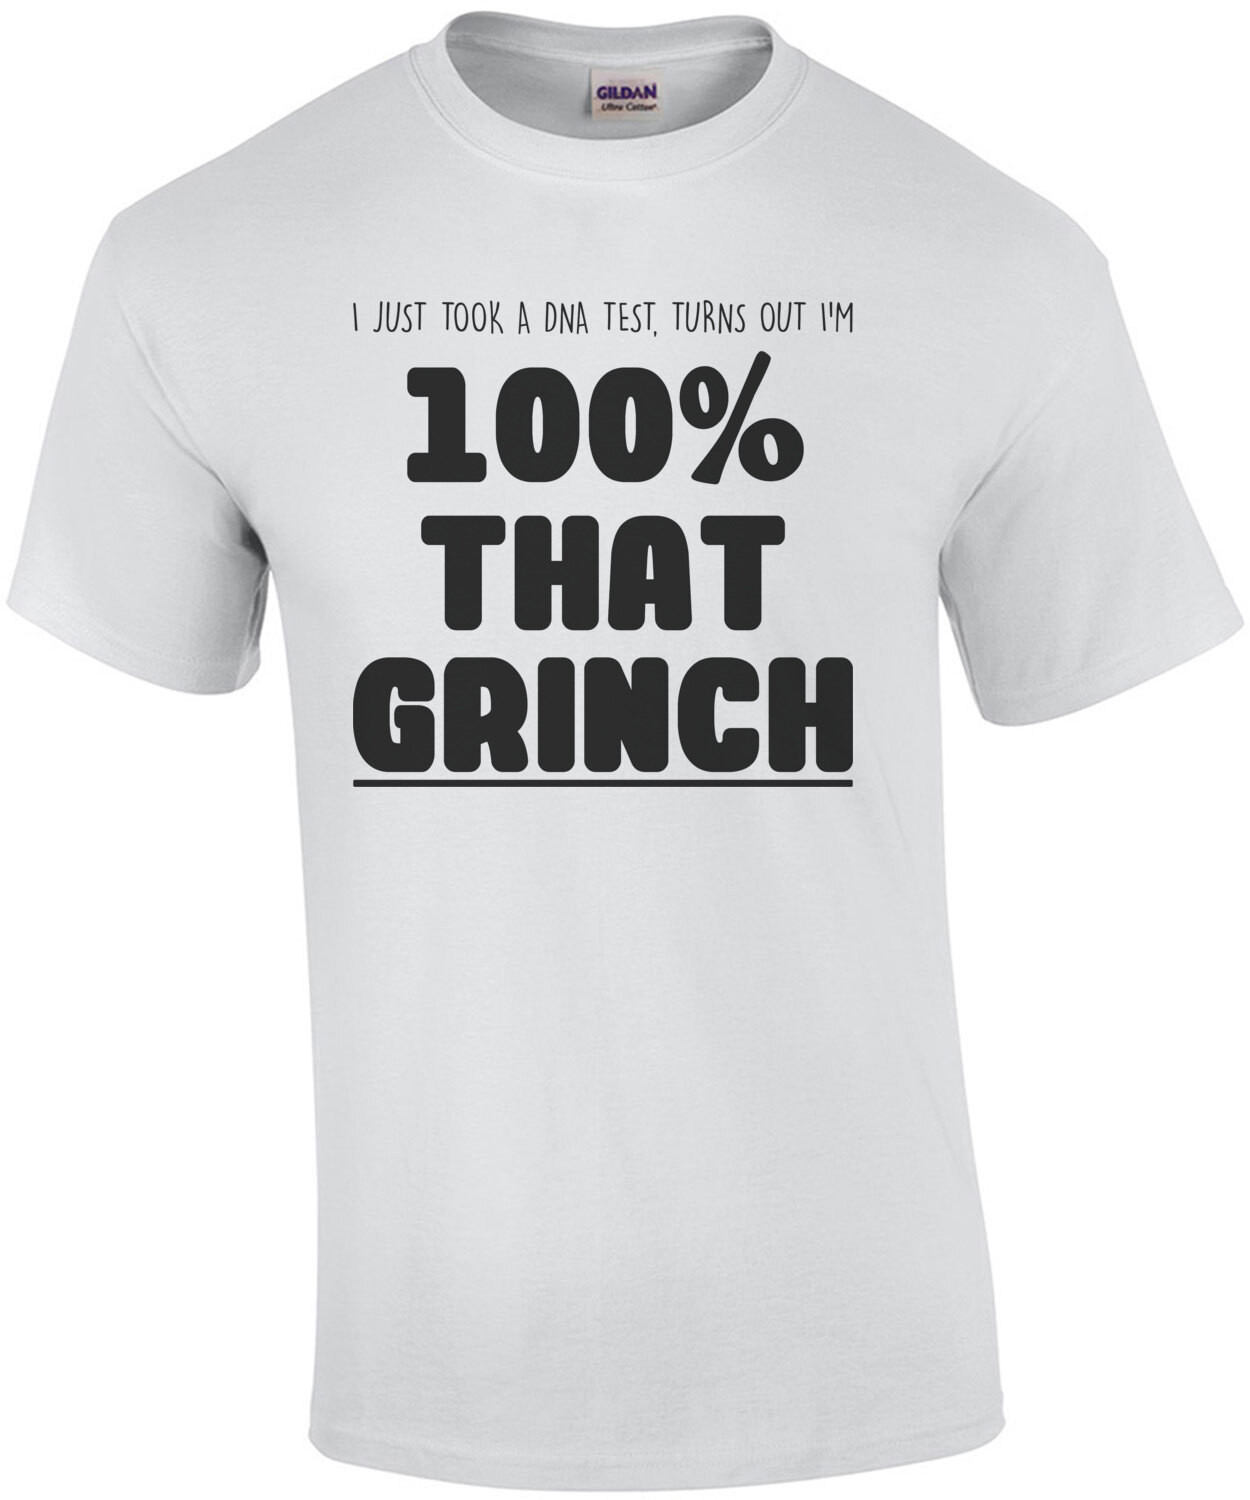 I just took a DNA test, turns out I'm 100% that grinch - funny christmas t-shirt